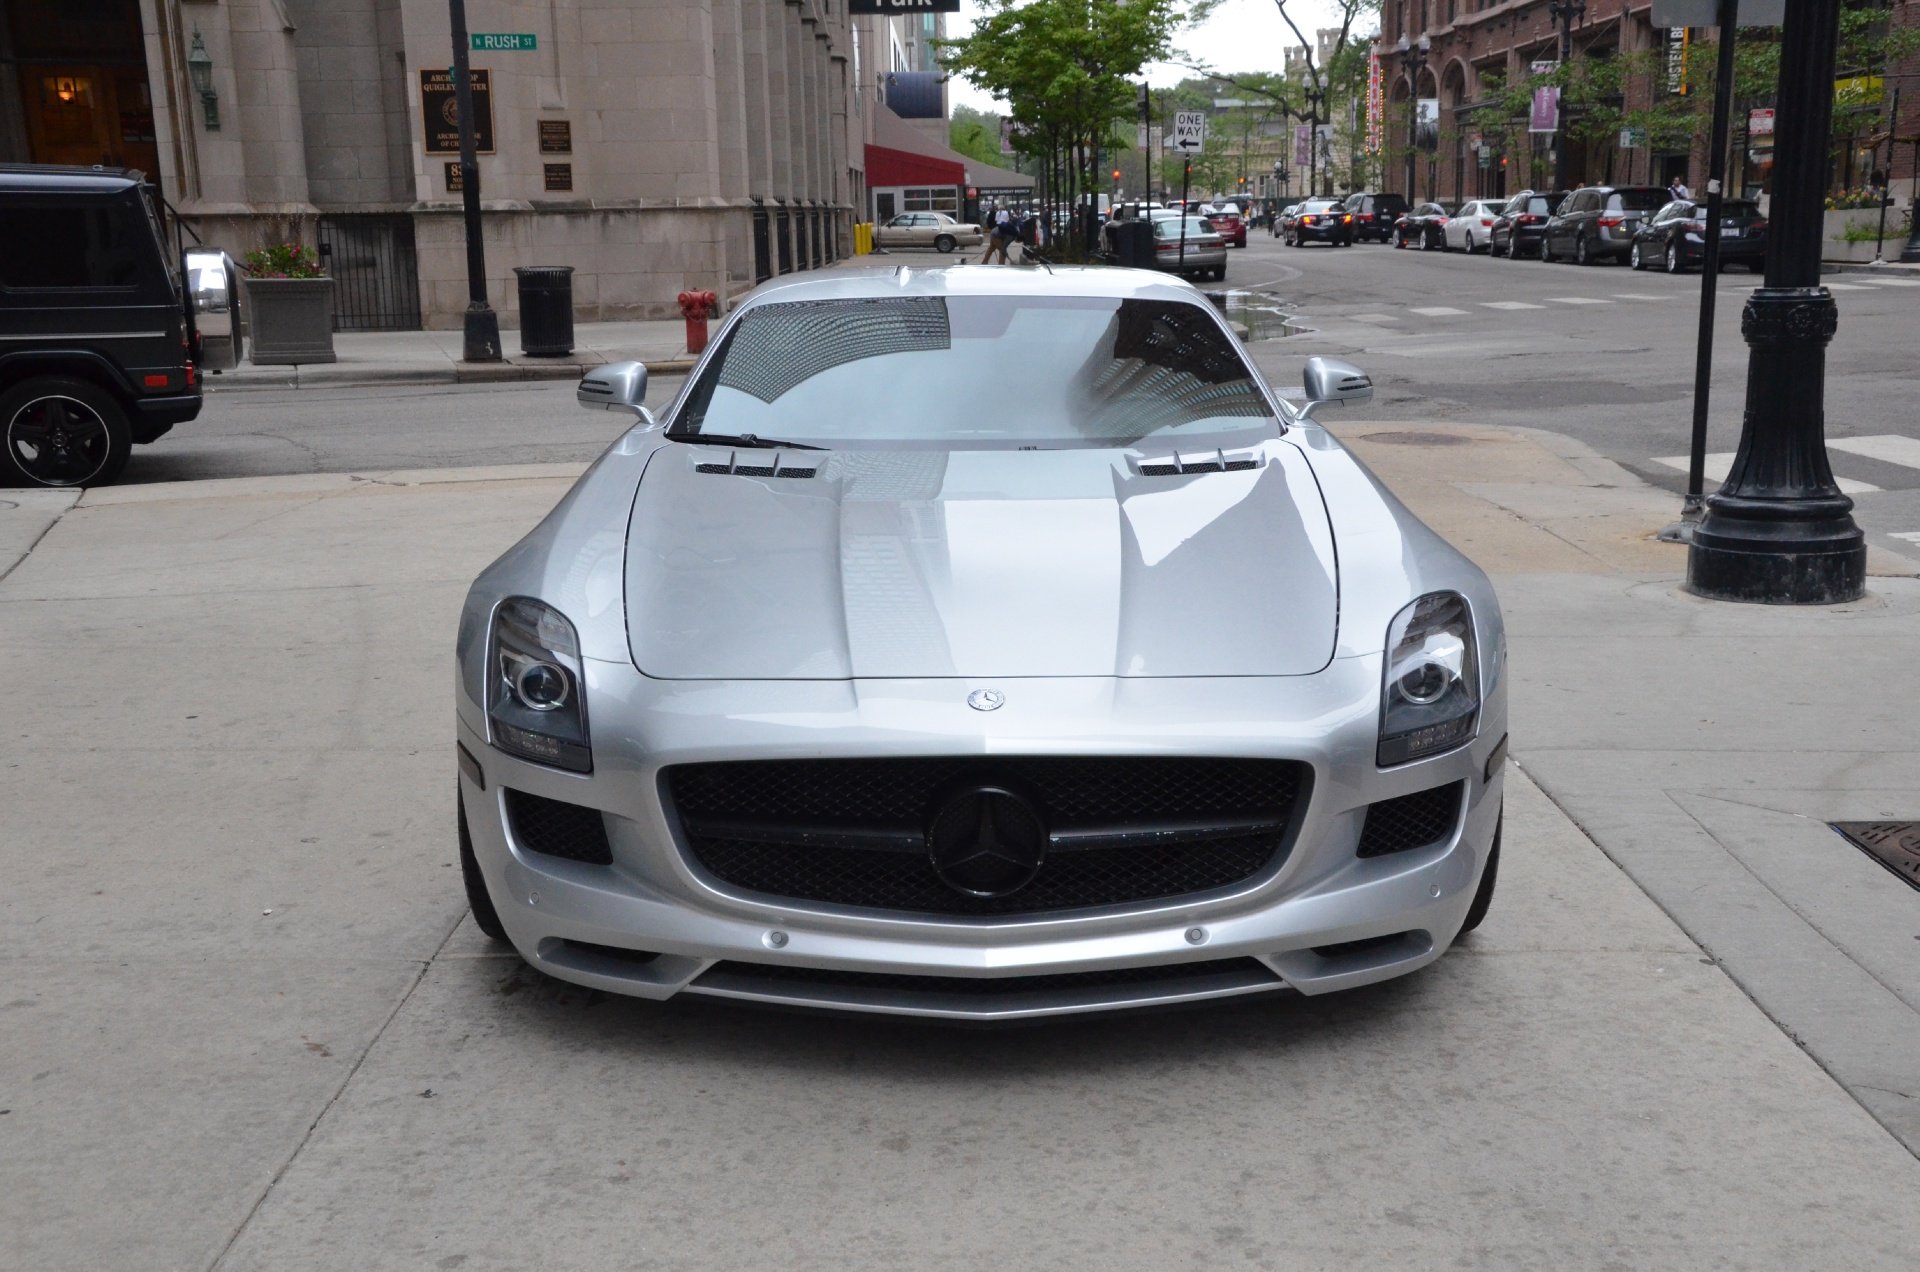 2011, Mercedes, Sls, Amg, Coupe, Germany, Silve Wallpaper